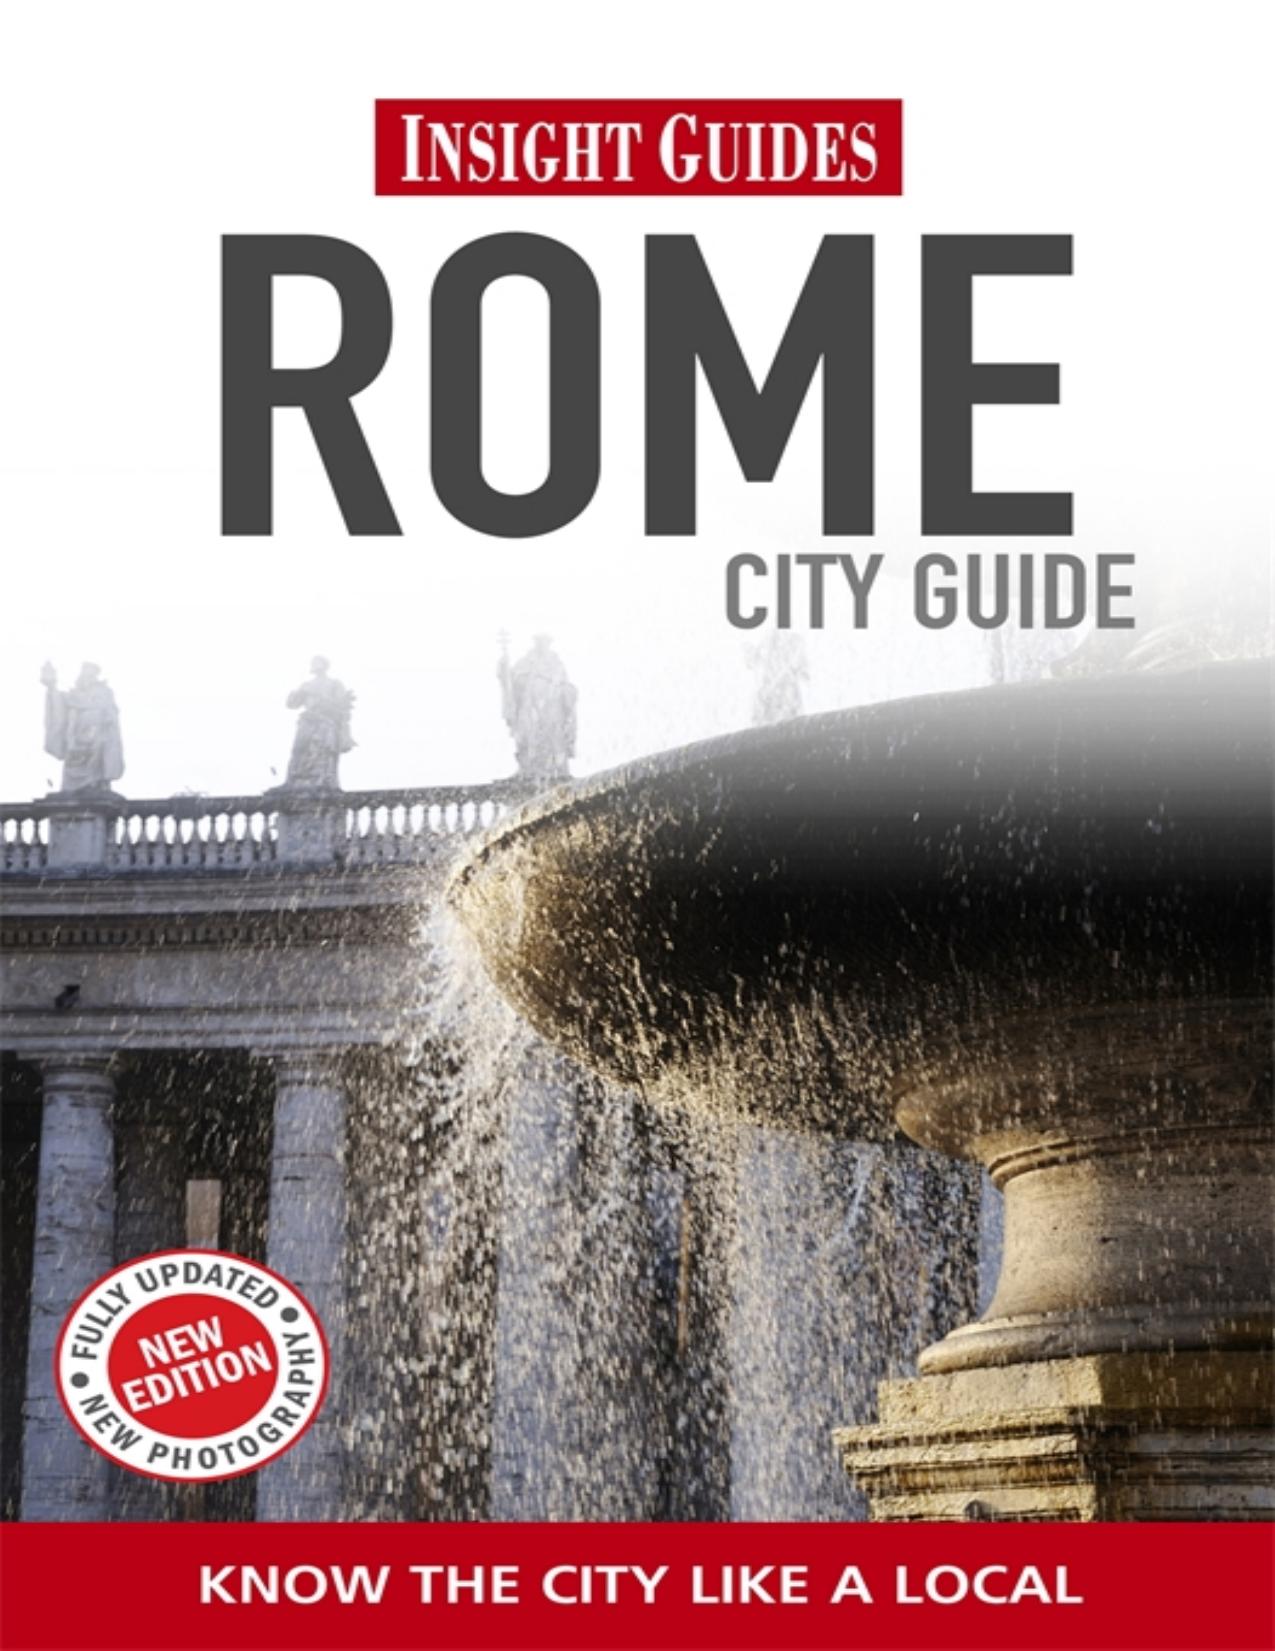 Insight Guides: Rome City Guide by Insight Guides